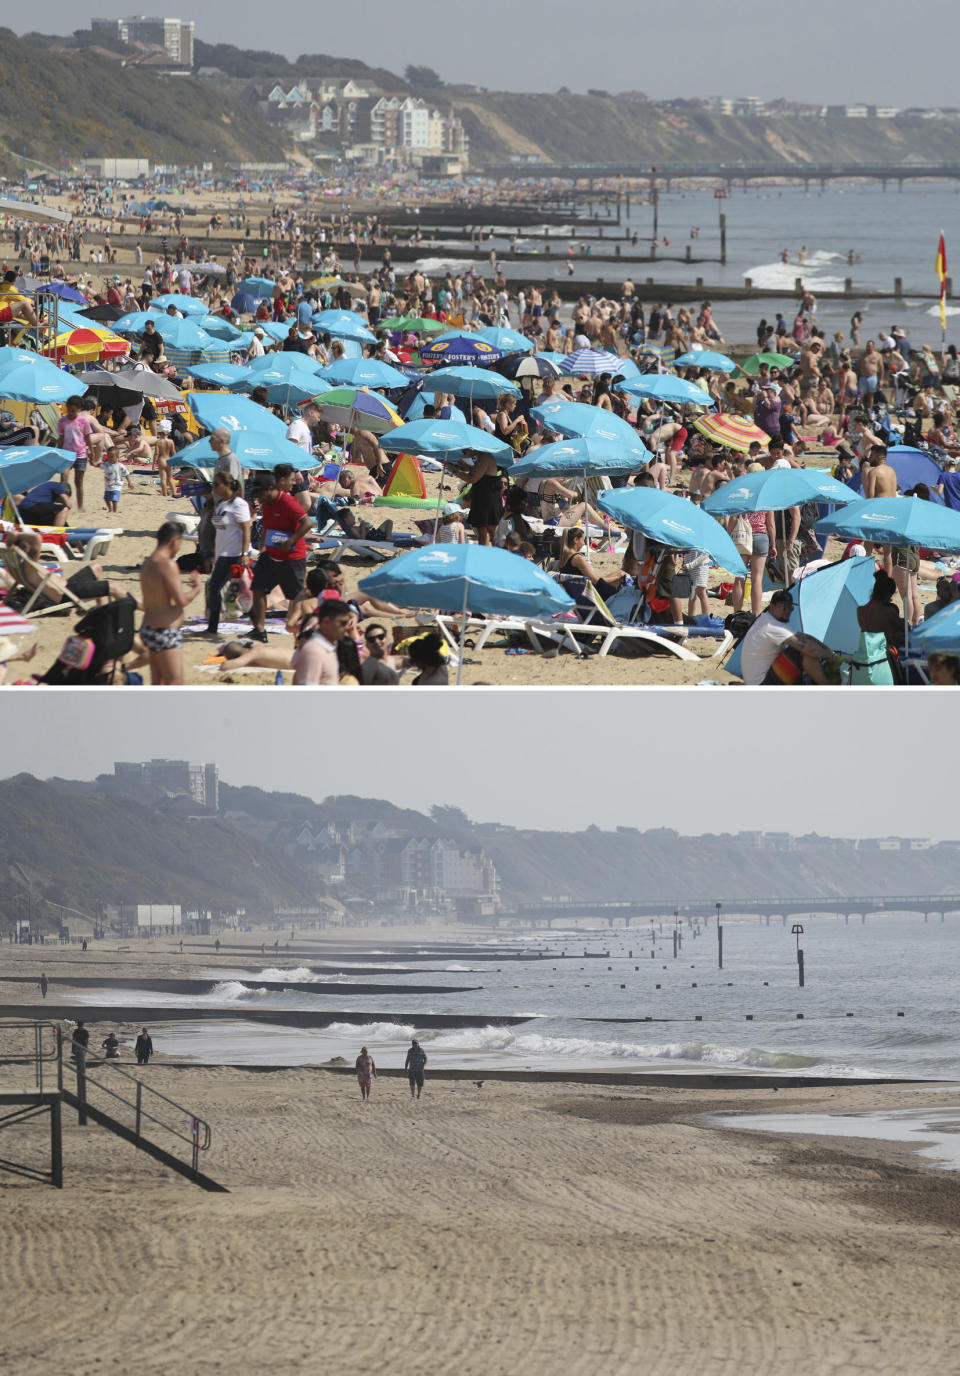 A combo of photos showing of people enjoying the hot weather at a busy Bournemouth beach, Dorset, England during the Easter bank holiday weekend on April 20, 2019, top, and the near deserted beach on Friday April 10, 2020 as the UK continues in lockdown to help curb the spread of the coronavirus. The highly contagious COVID-19 coronavirus has impacted on nations around the globe, many imposing self isolation and exercising social distancing when people move from their homes. (Andrew Matthews/PA via AP)